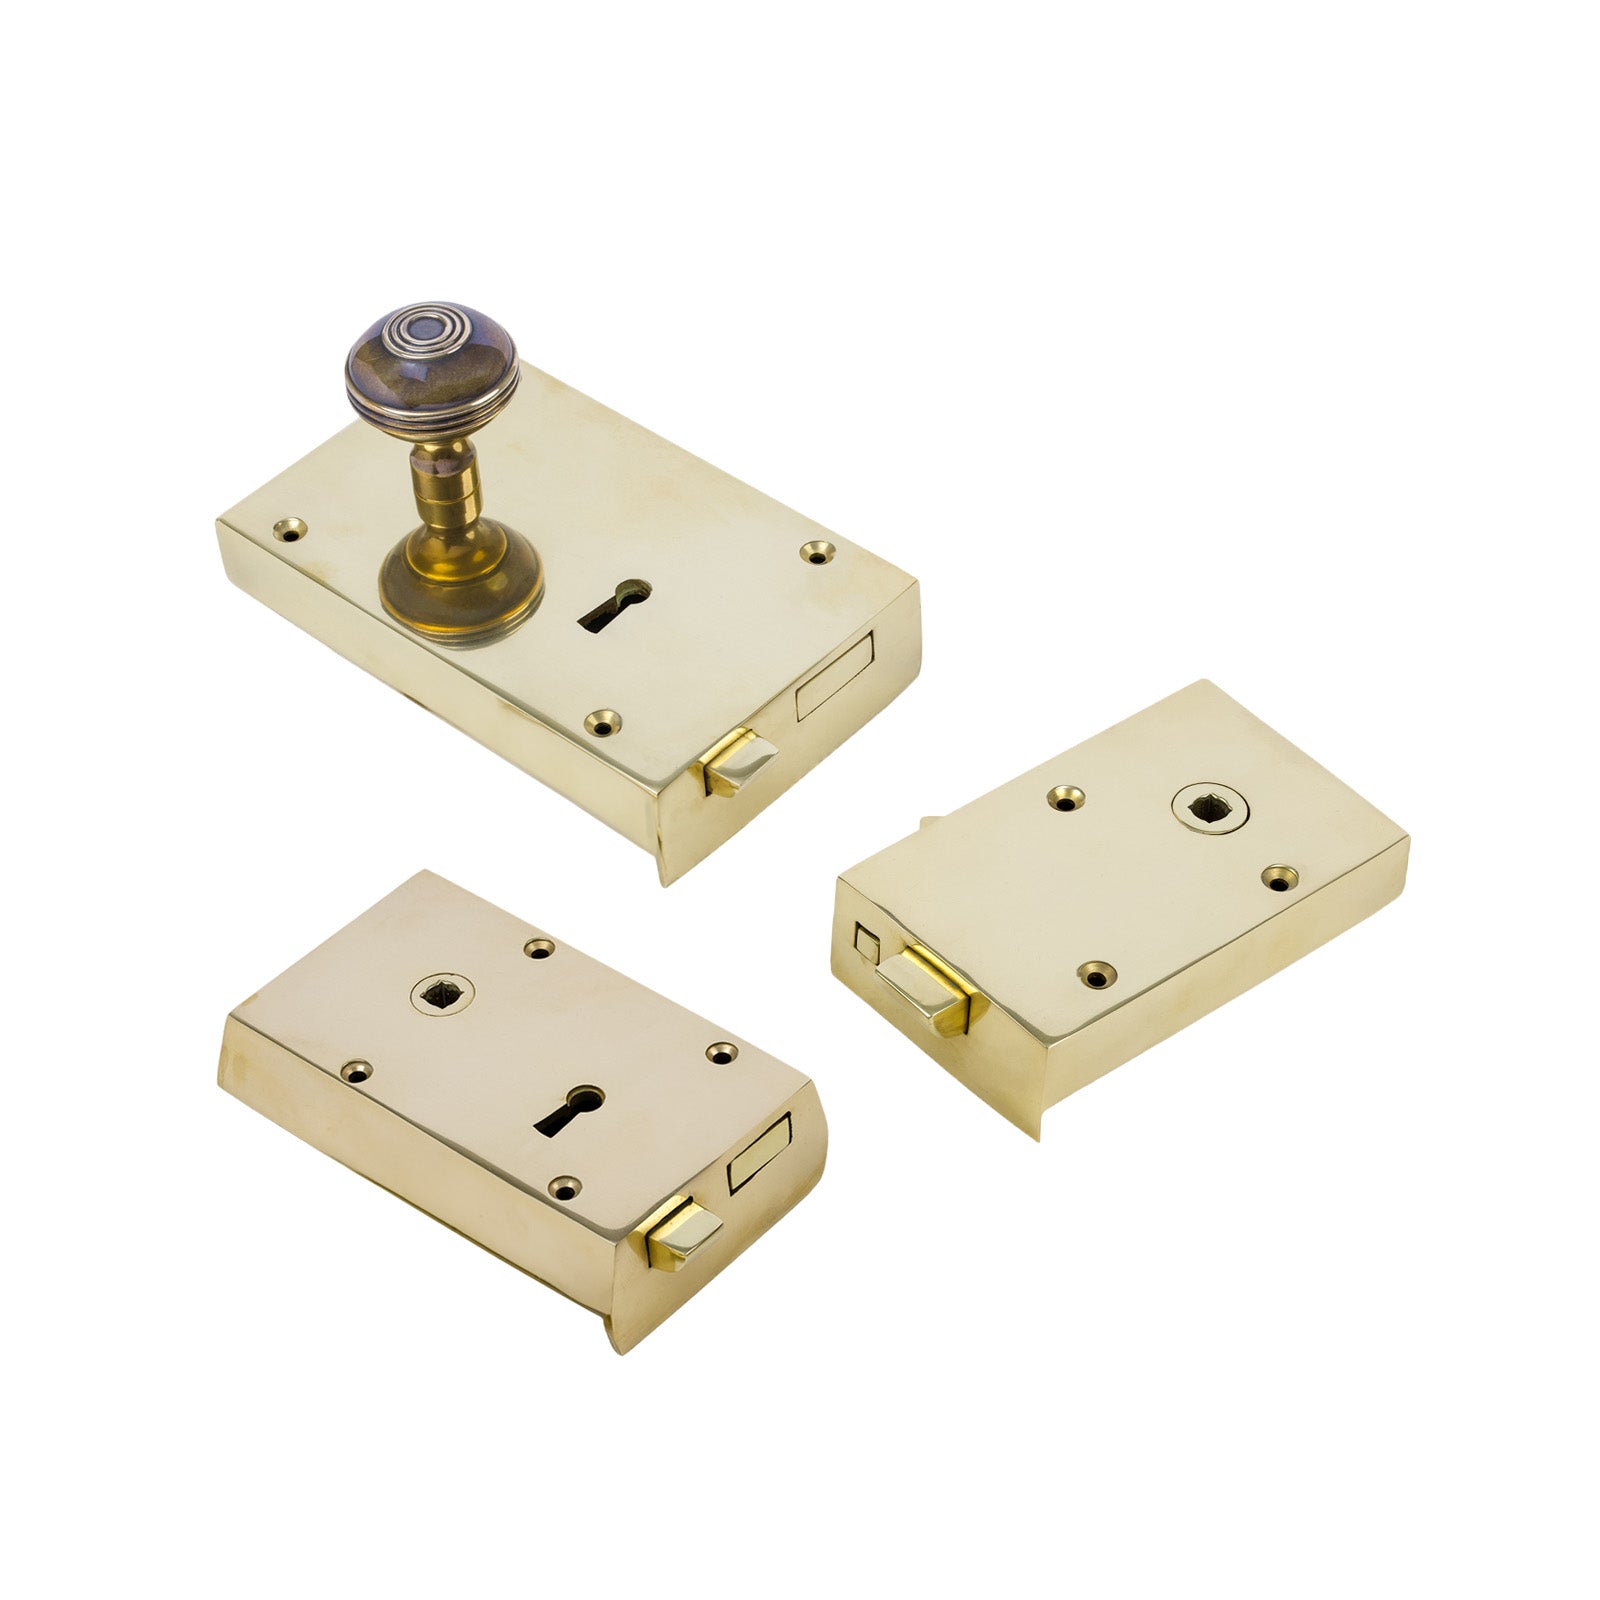 Heavy solid brass rim locks in 3 different designs, available with matching door knob sets.